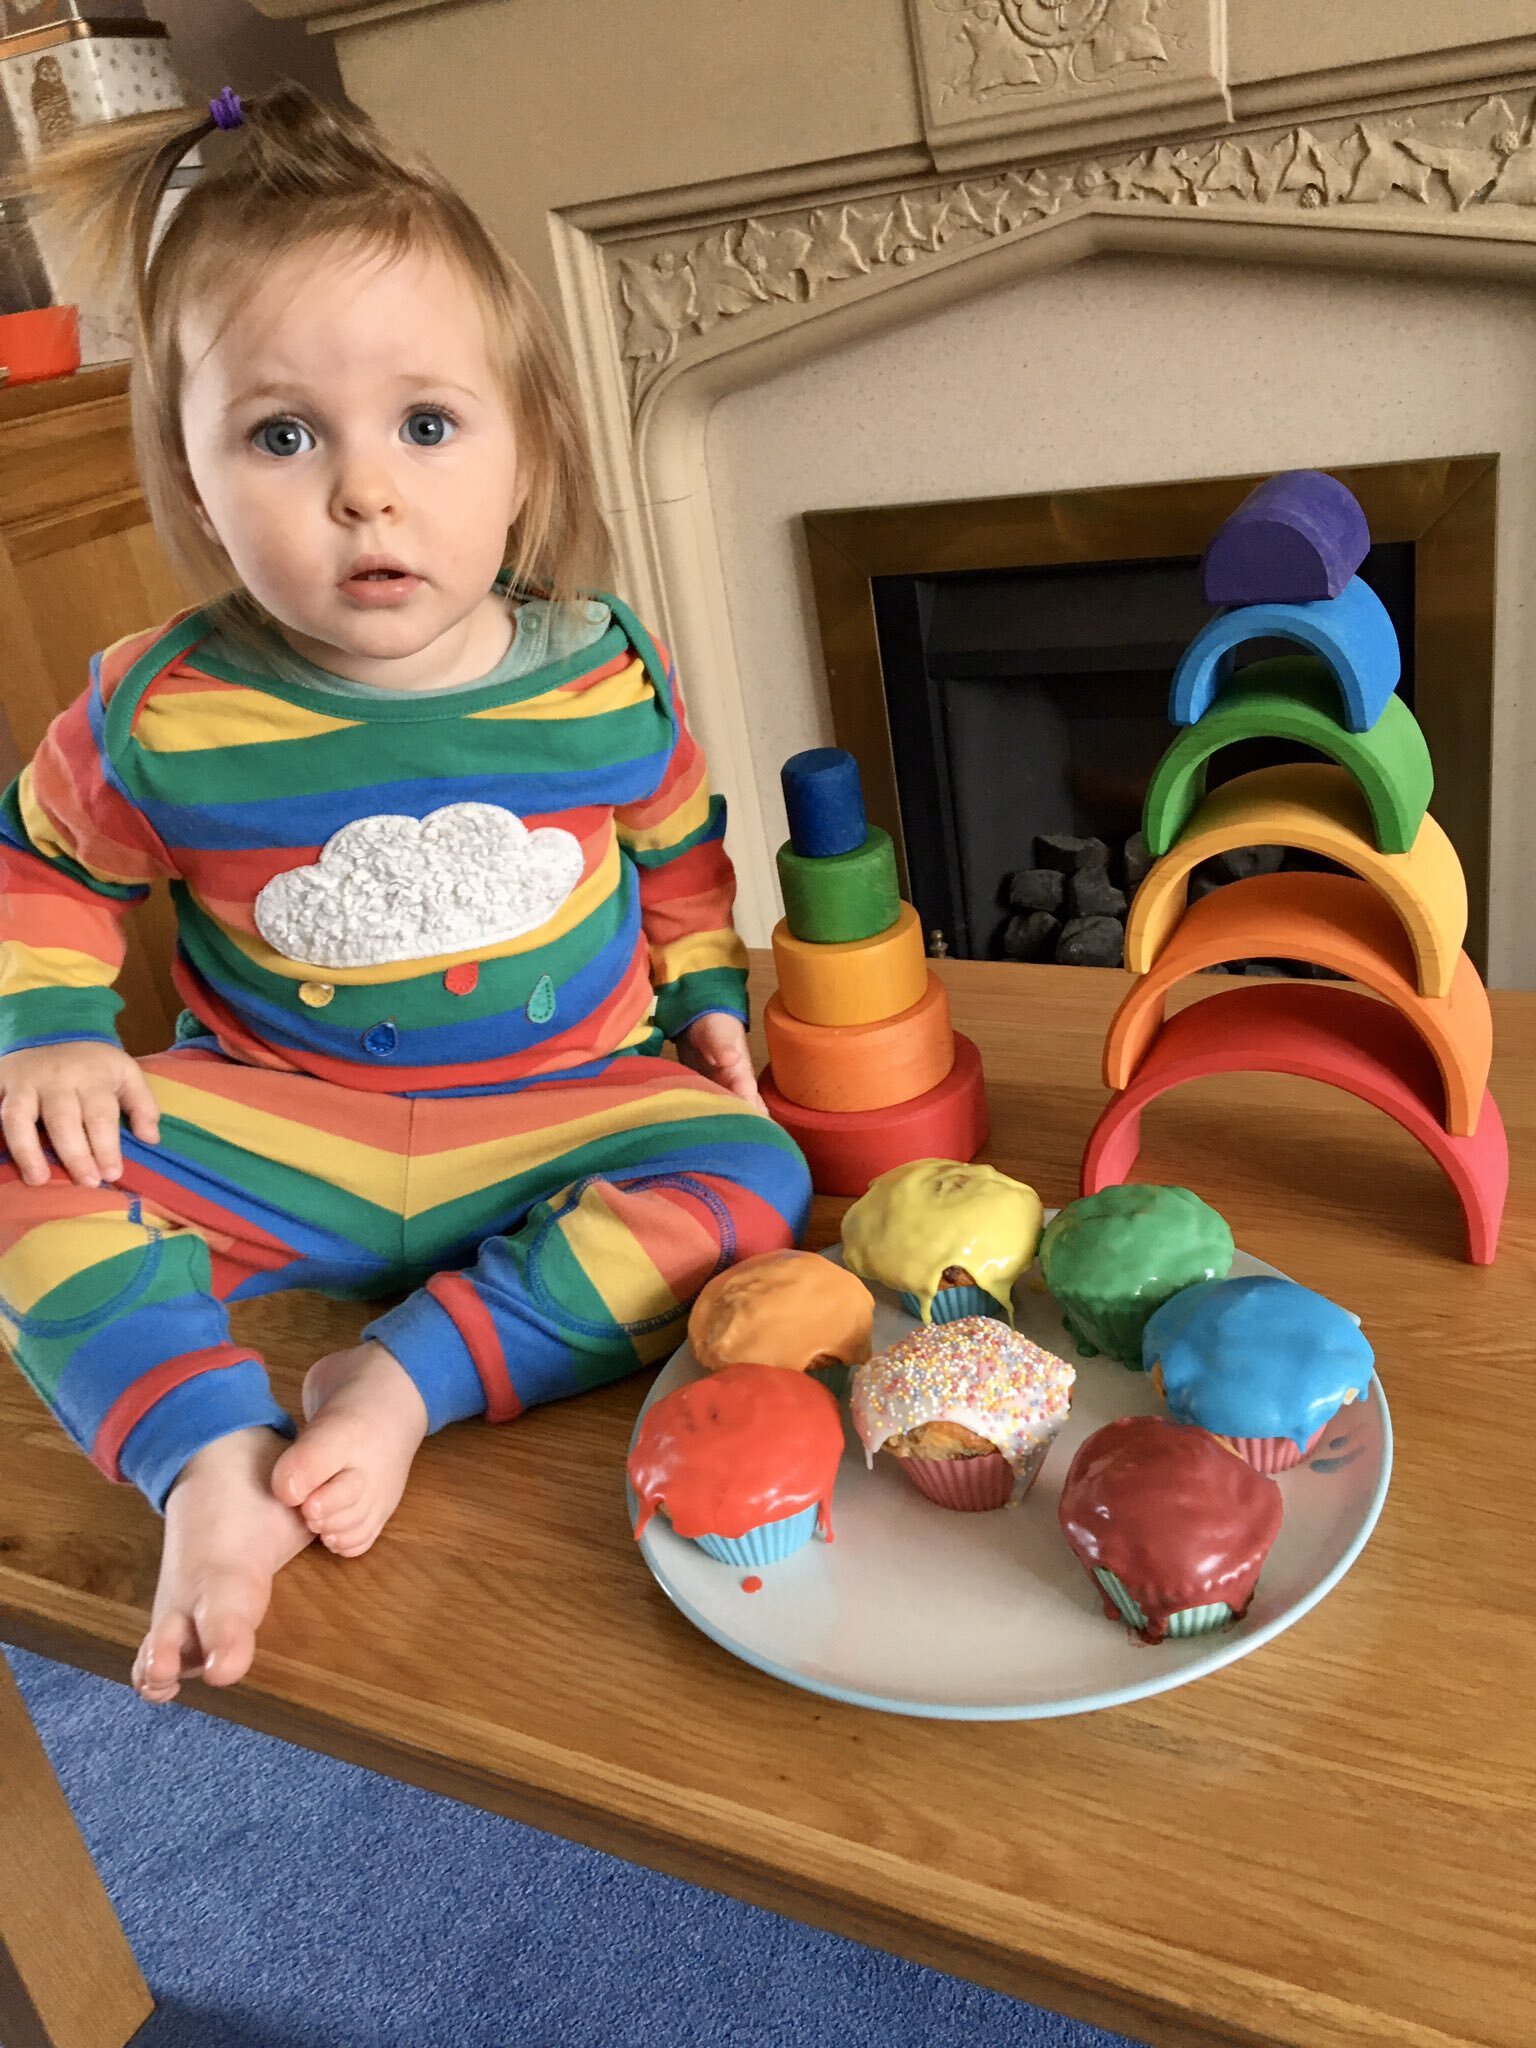 Holly Kenny's rainbow cupcakes and child